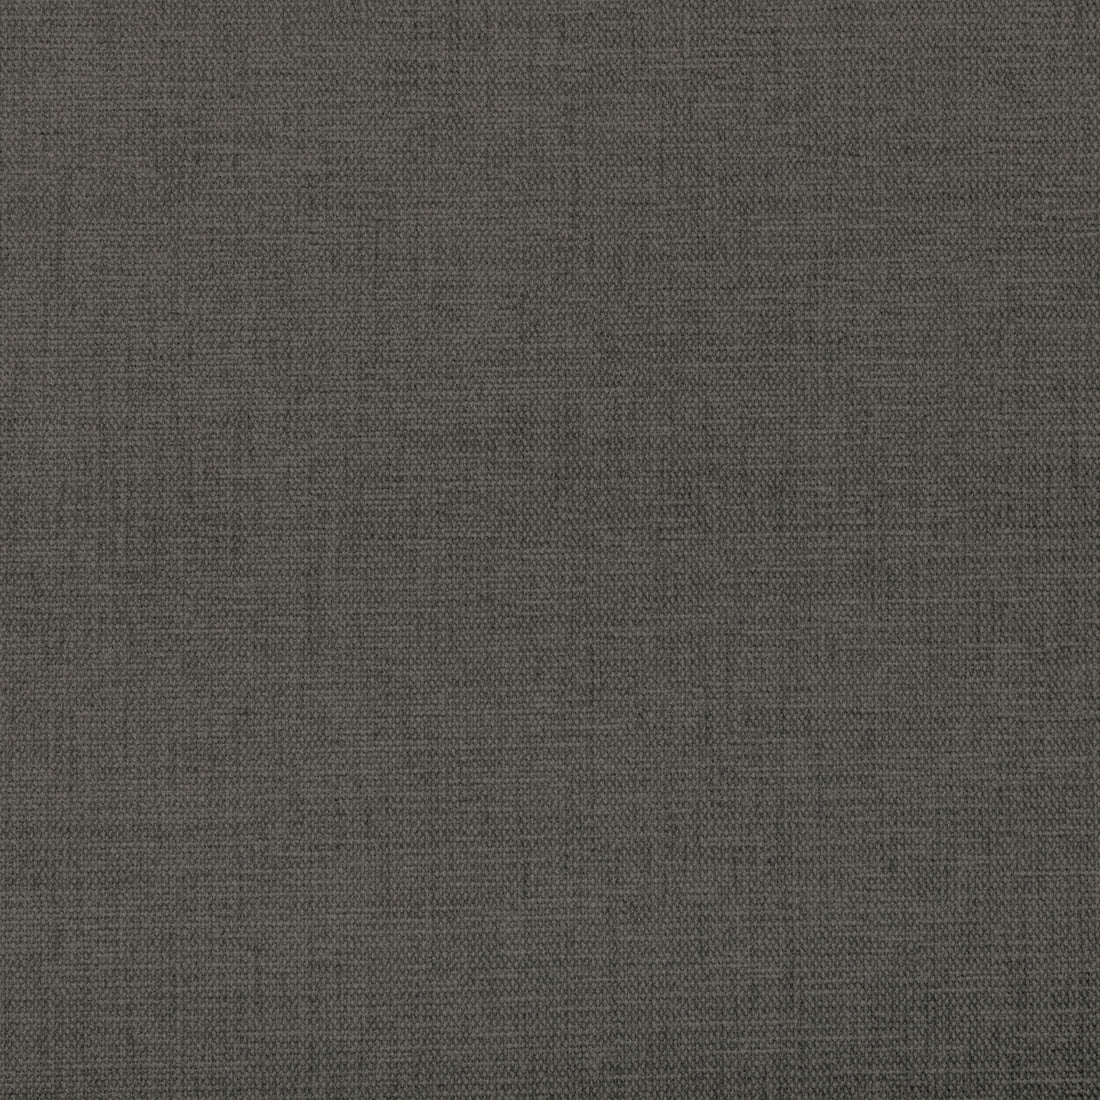 Kravet Contract fabric in 34961-1521 color - pattern 34961.1521.0 - by Kravet Contract in the Performance Kravetarmor collection